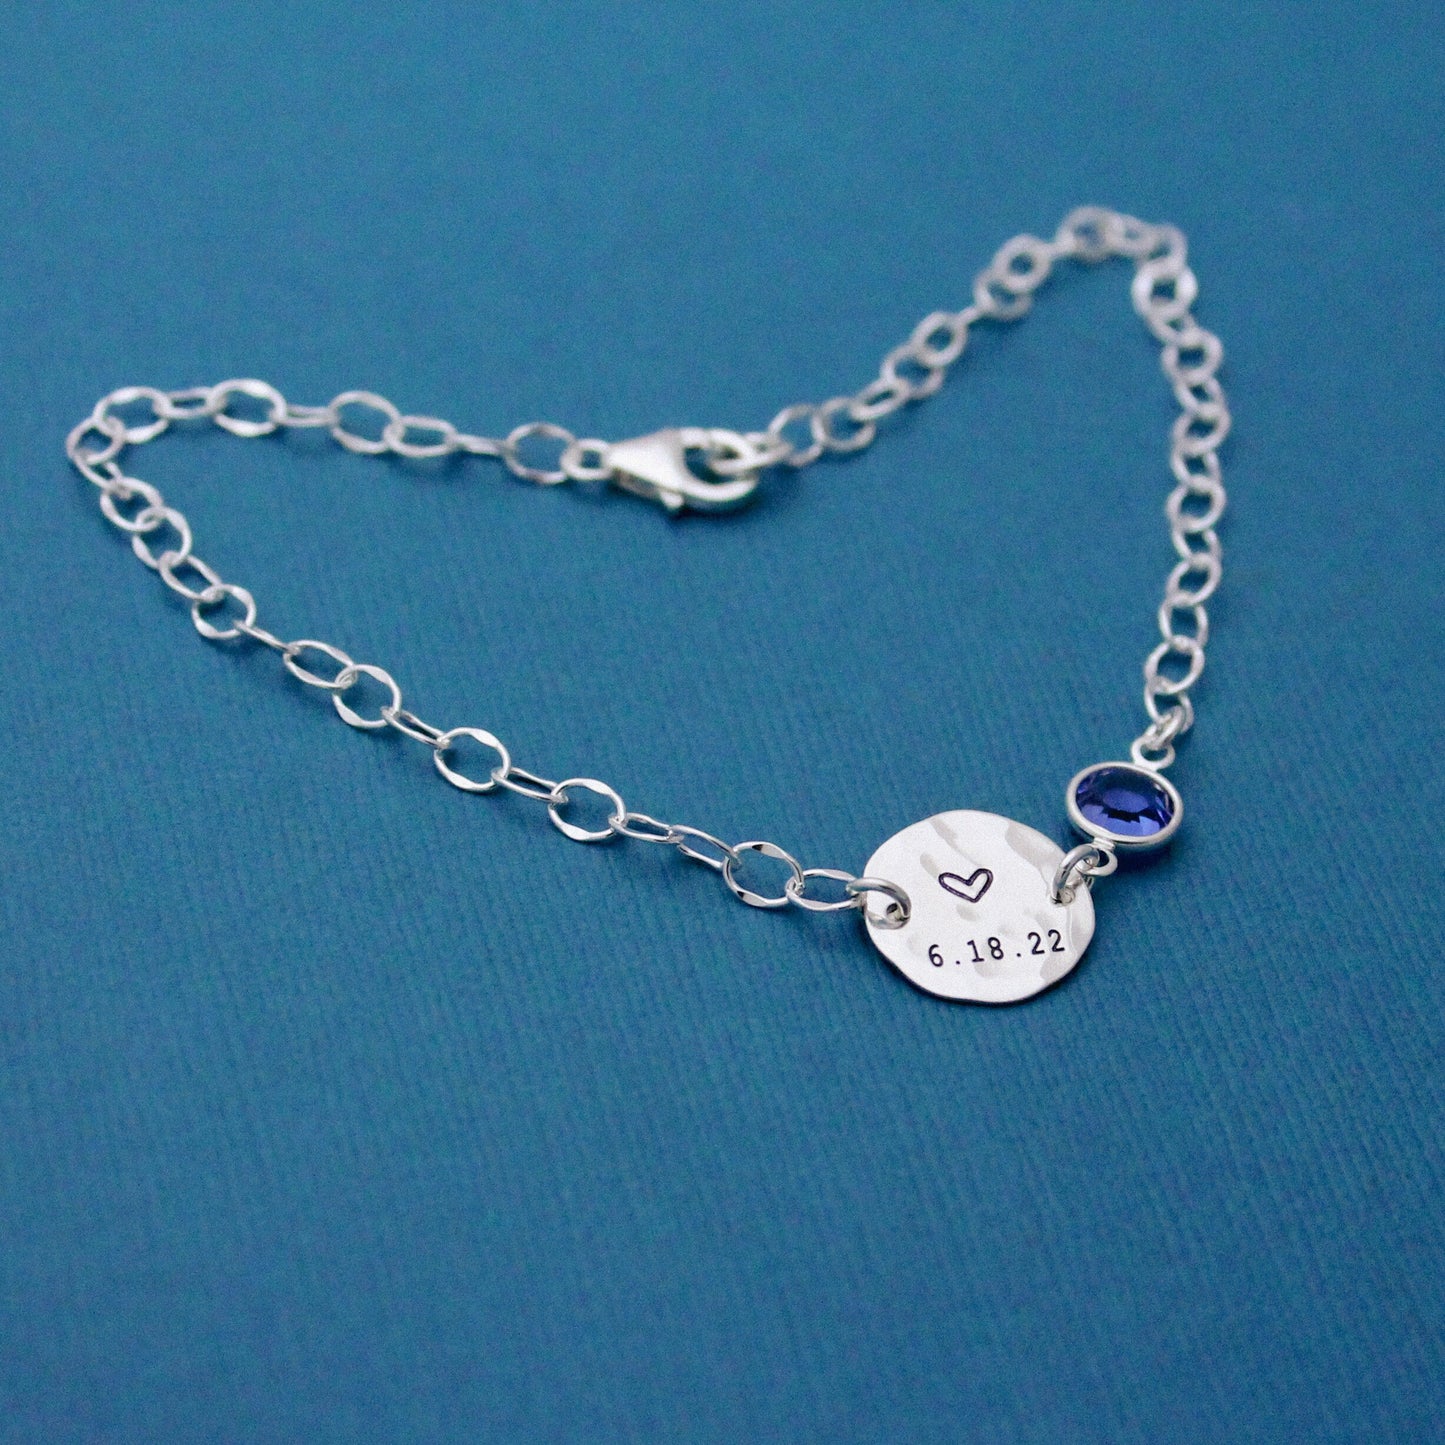 Personalized Anklet, Custom Anklet, New Mom Grandma Anklet, Mother's Day Gift, Gifts for Her, .925 Hand Stamped Personalized Jewelry